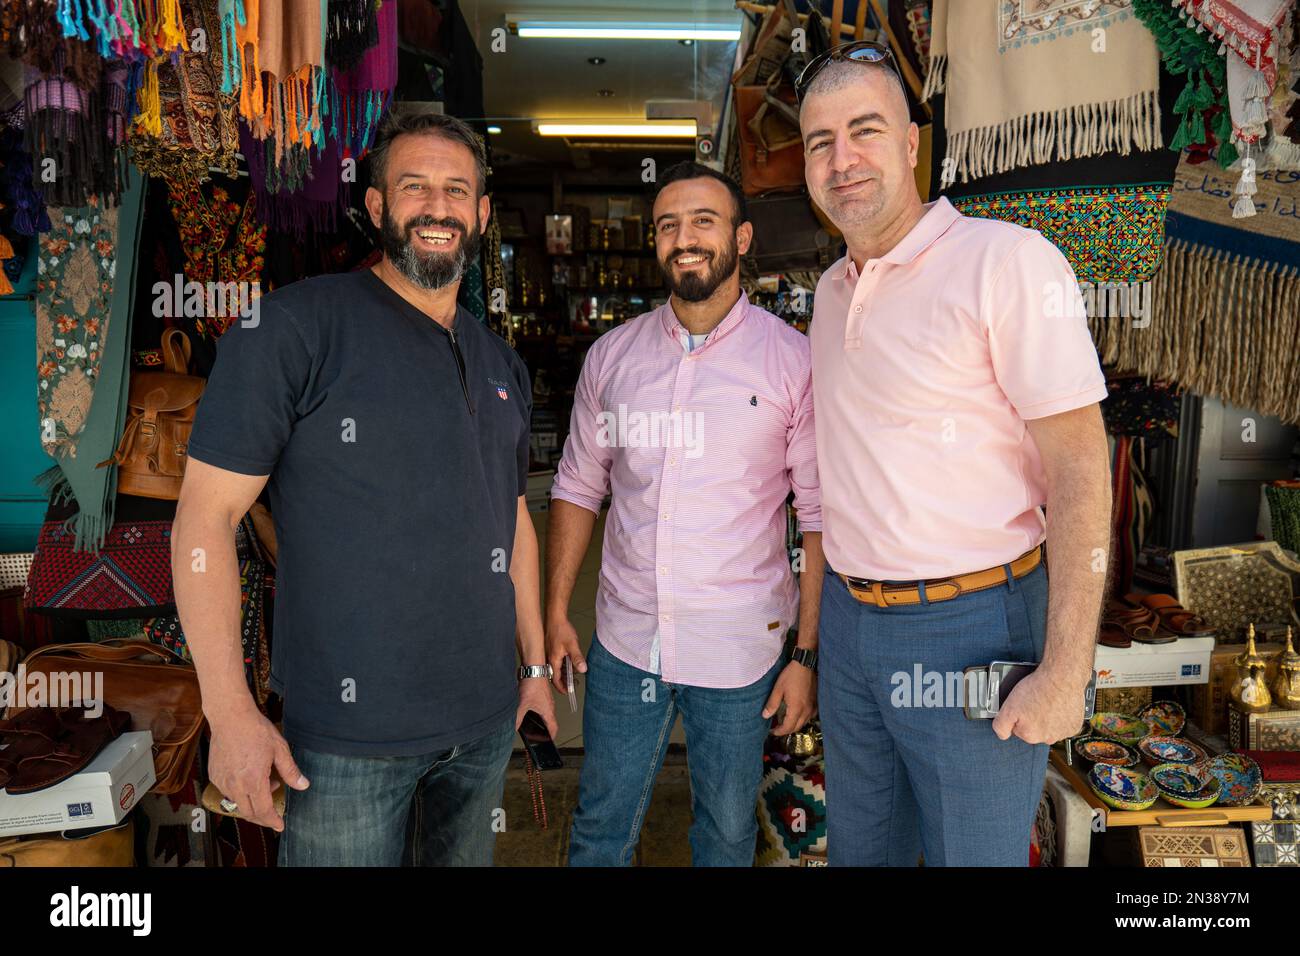 Bethlehem, West Bank, Palestine - 21 July 2022: Three Arab Men Smile and Pose Together In Front of Different Merchandise of a Handcraft and Souvenir S Stock Photo